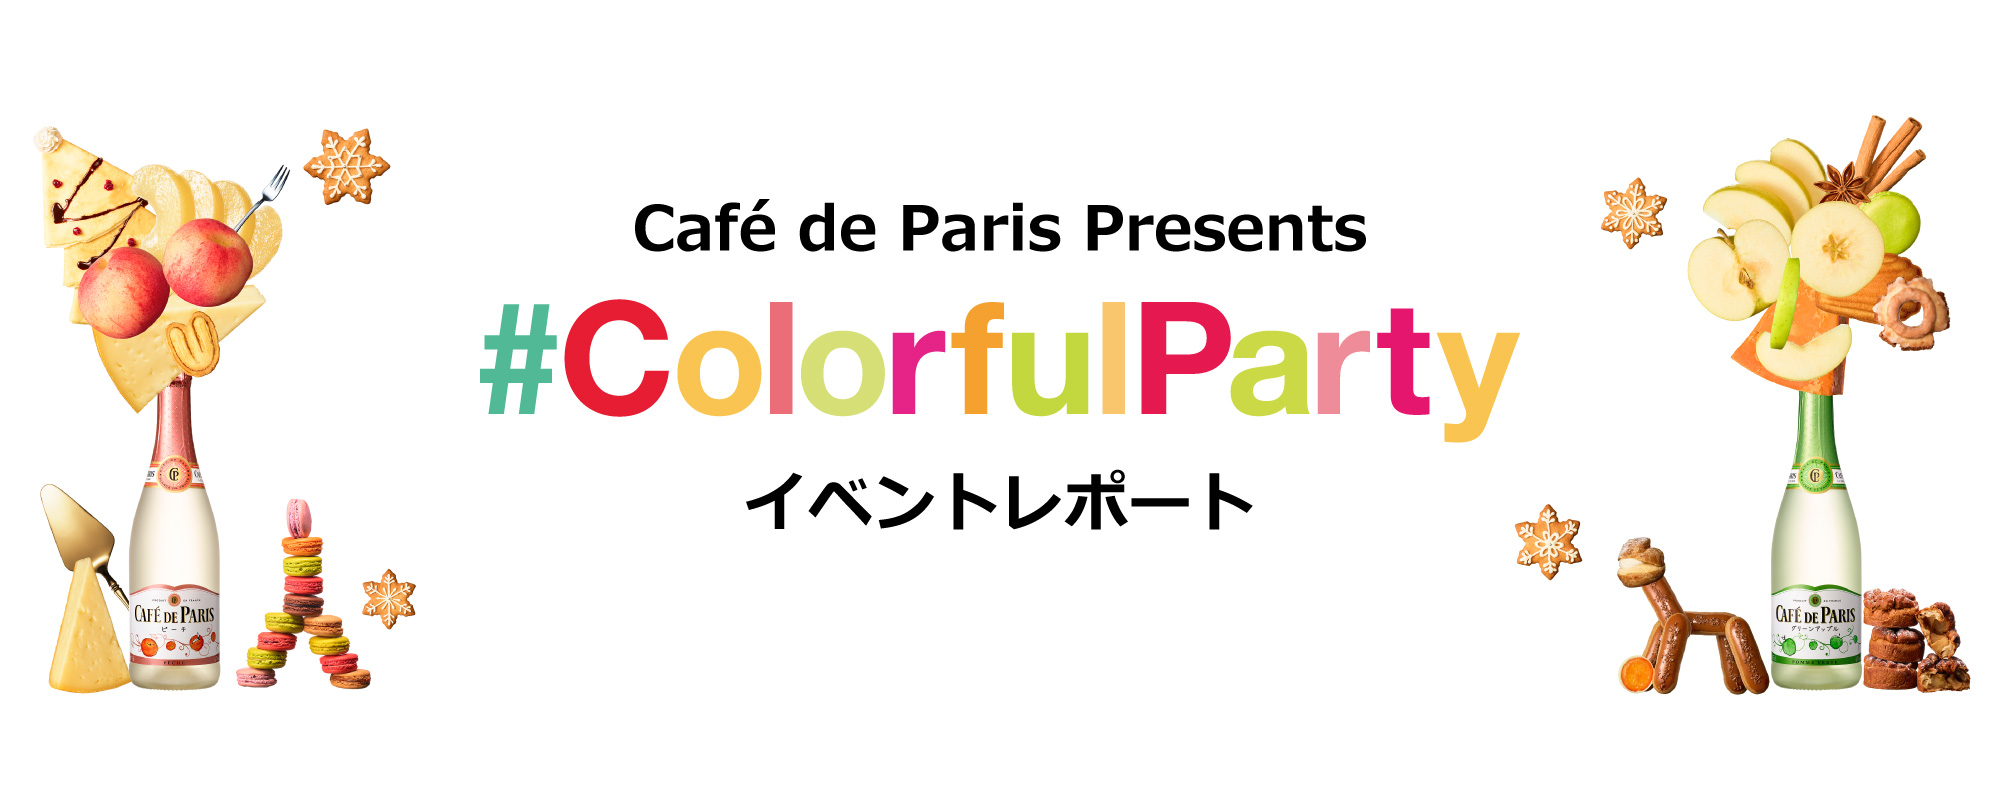 colorfulparty